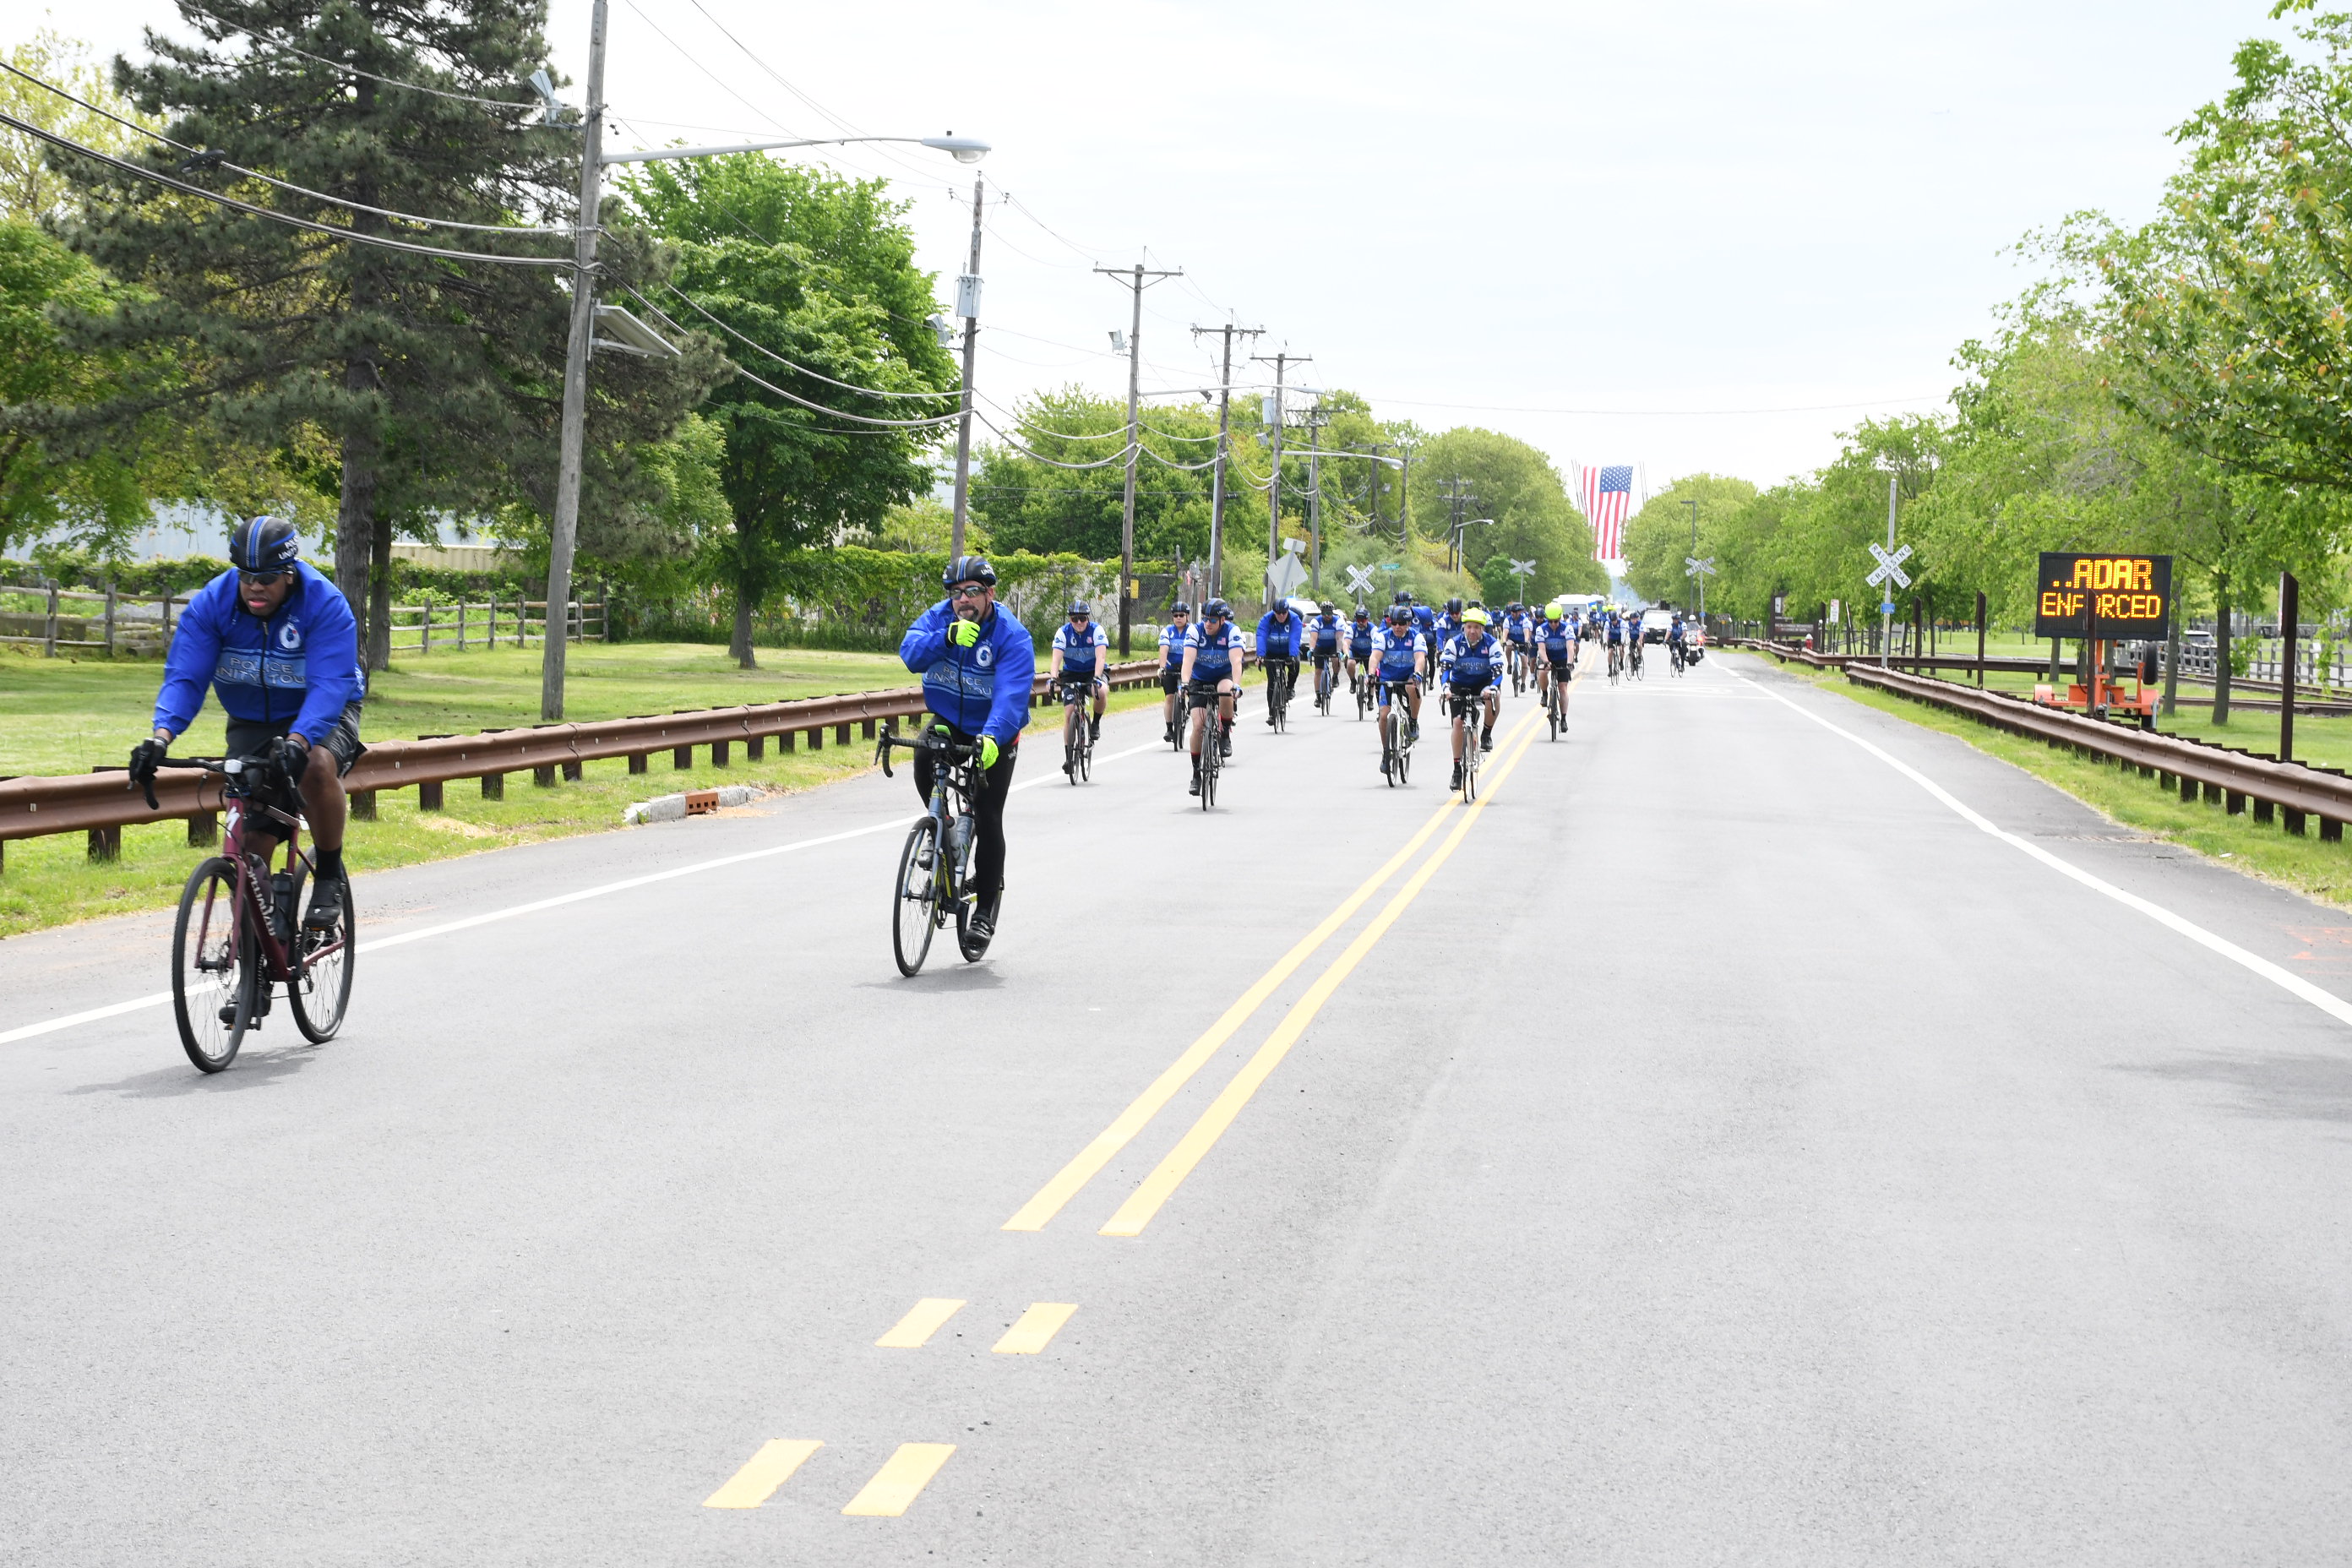 Police officers from Jersey City and other Hudson County police departments and law enforcement agencies start the annual Police Unity Tour after a ceremony at Liberty State Park in Jersey City May 9, 2023. Over the course of the four-day Unity Tour, thousands of police officers from around the nation will bike together to reach the National Law Enforcement Officers Memorial in Washington, D.C.